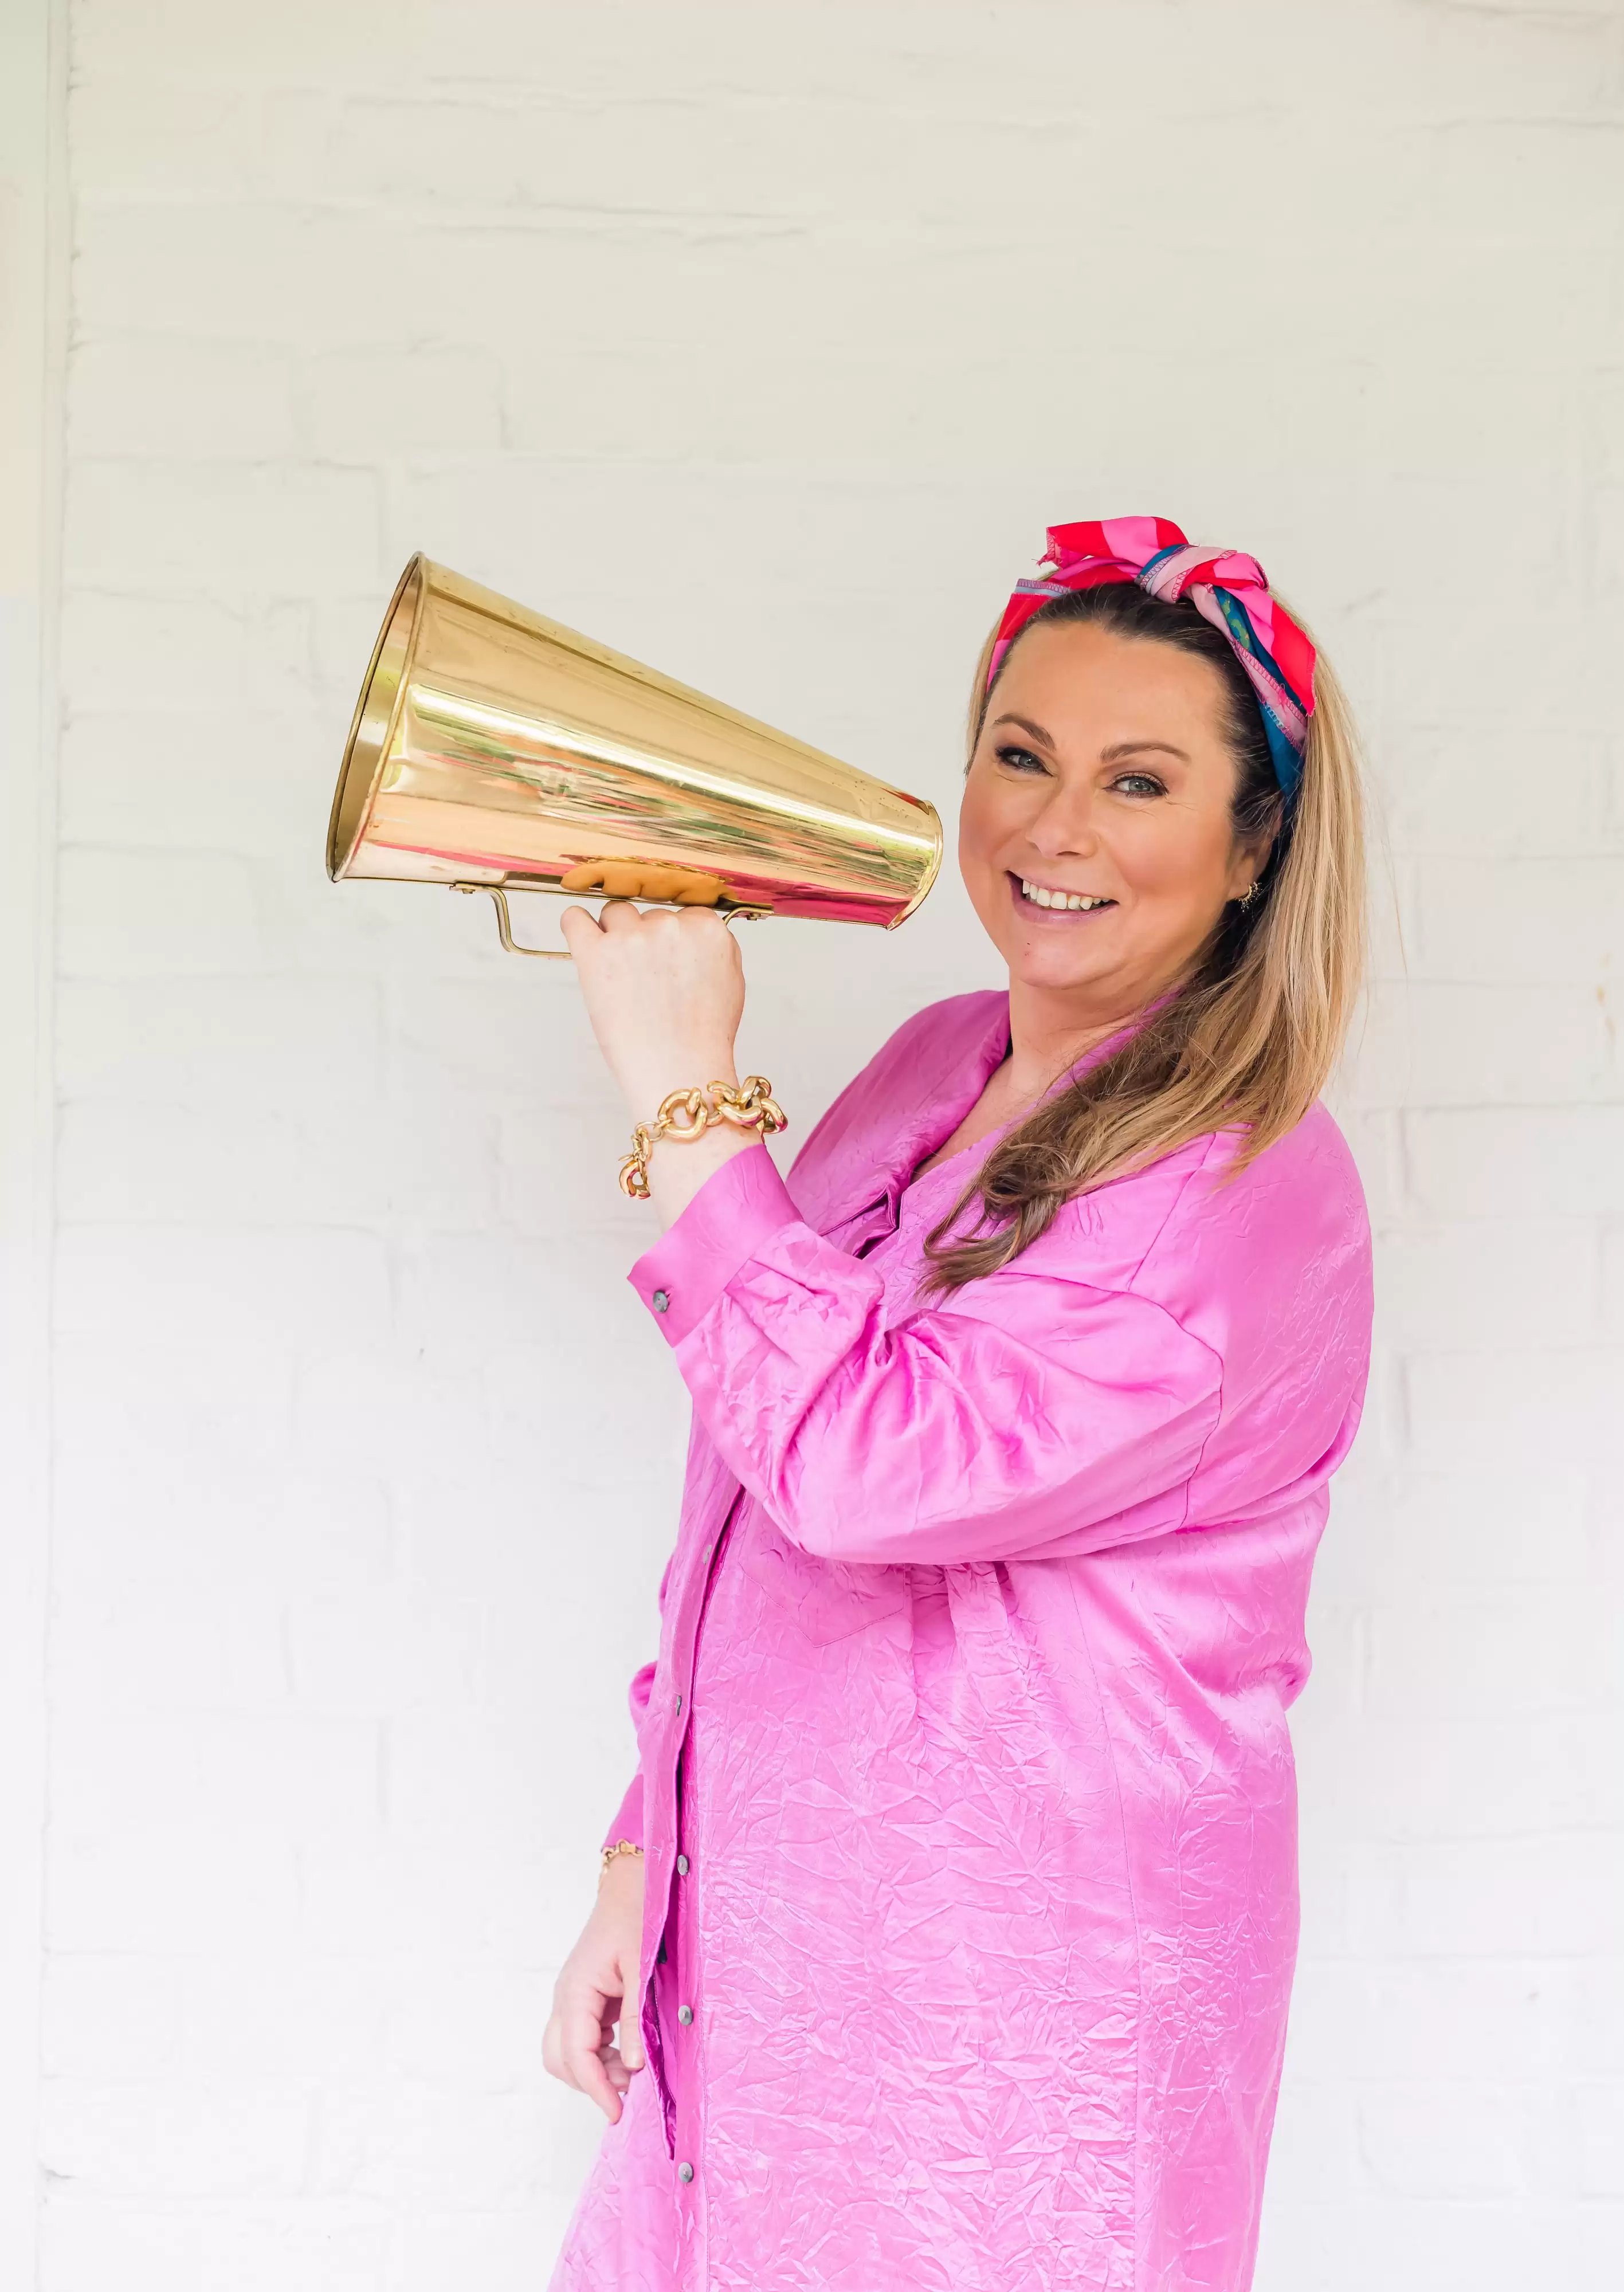 Holly Tucker holding a gold megaphone wearing a pink outfit 